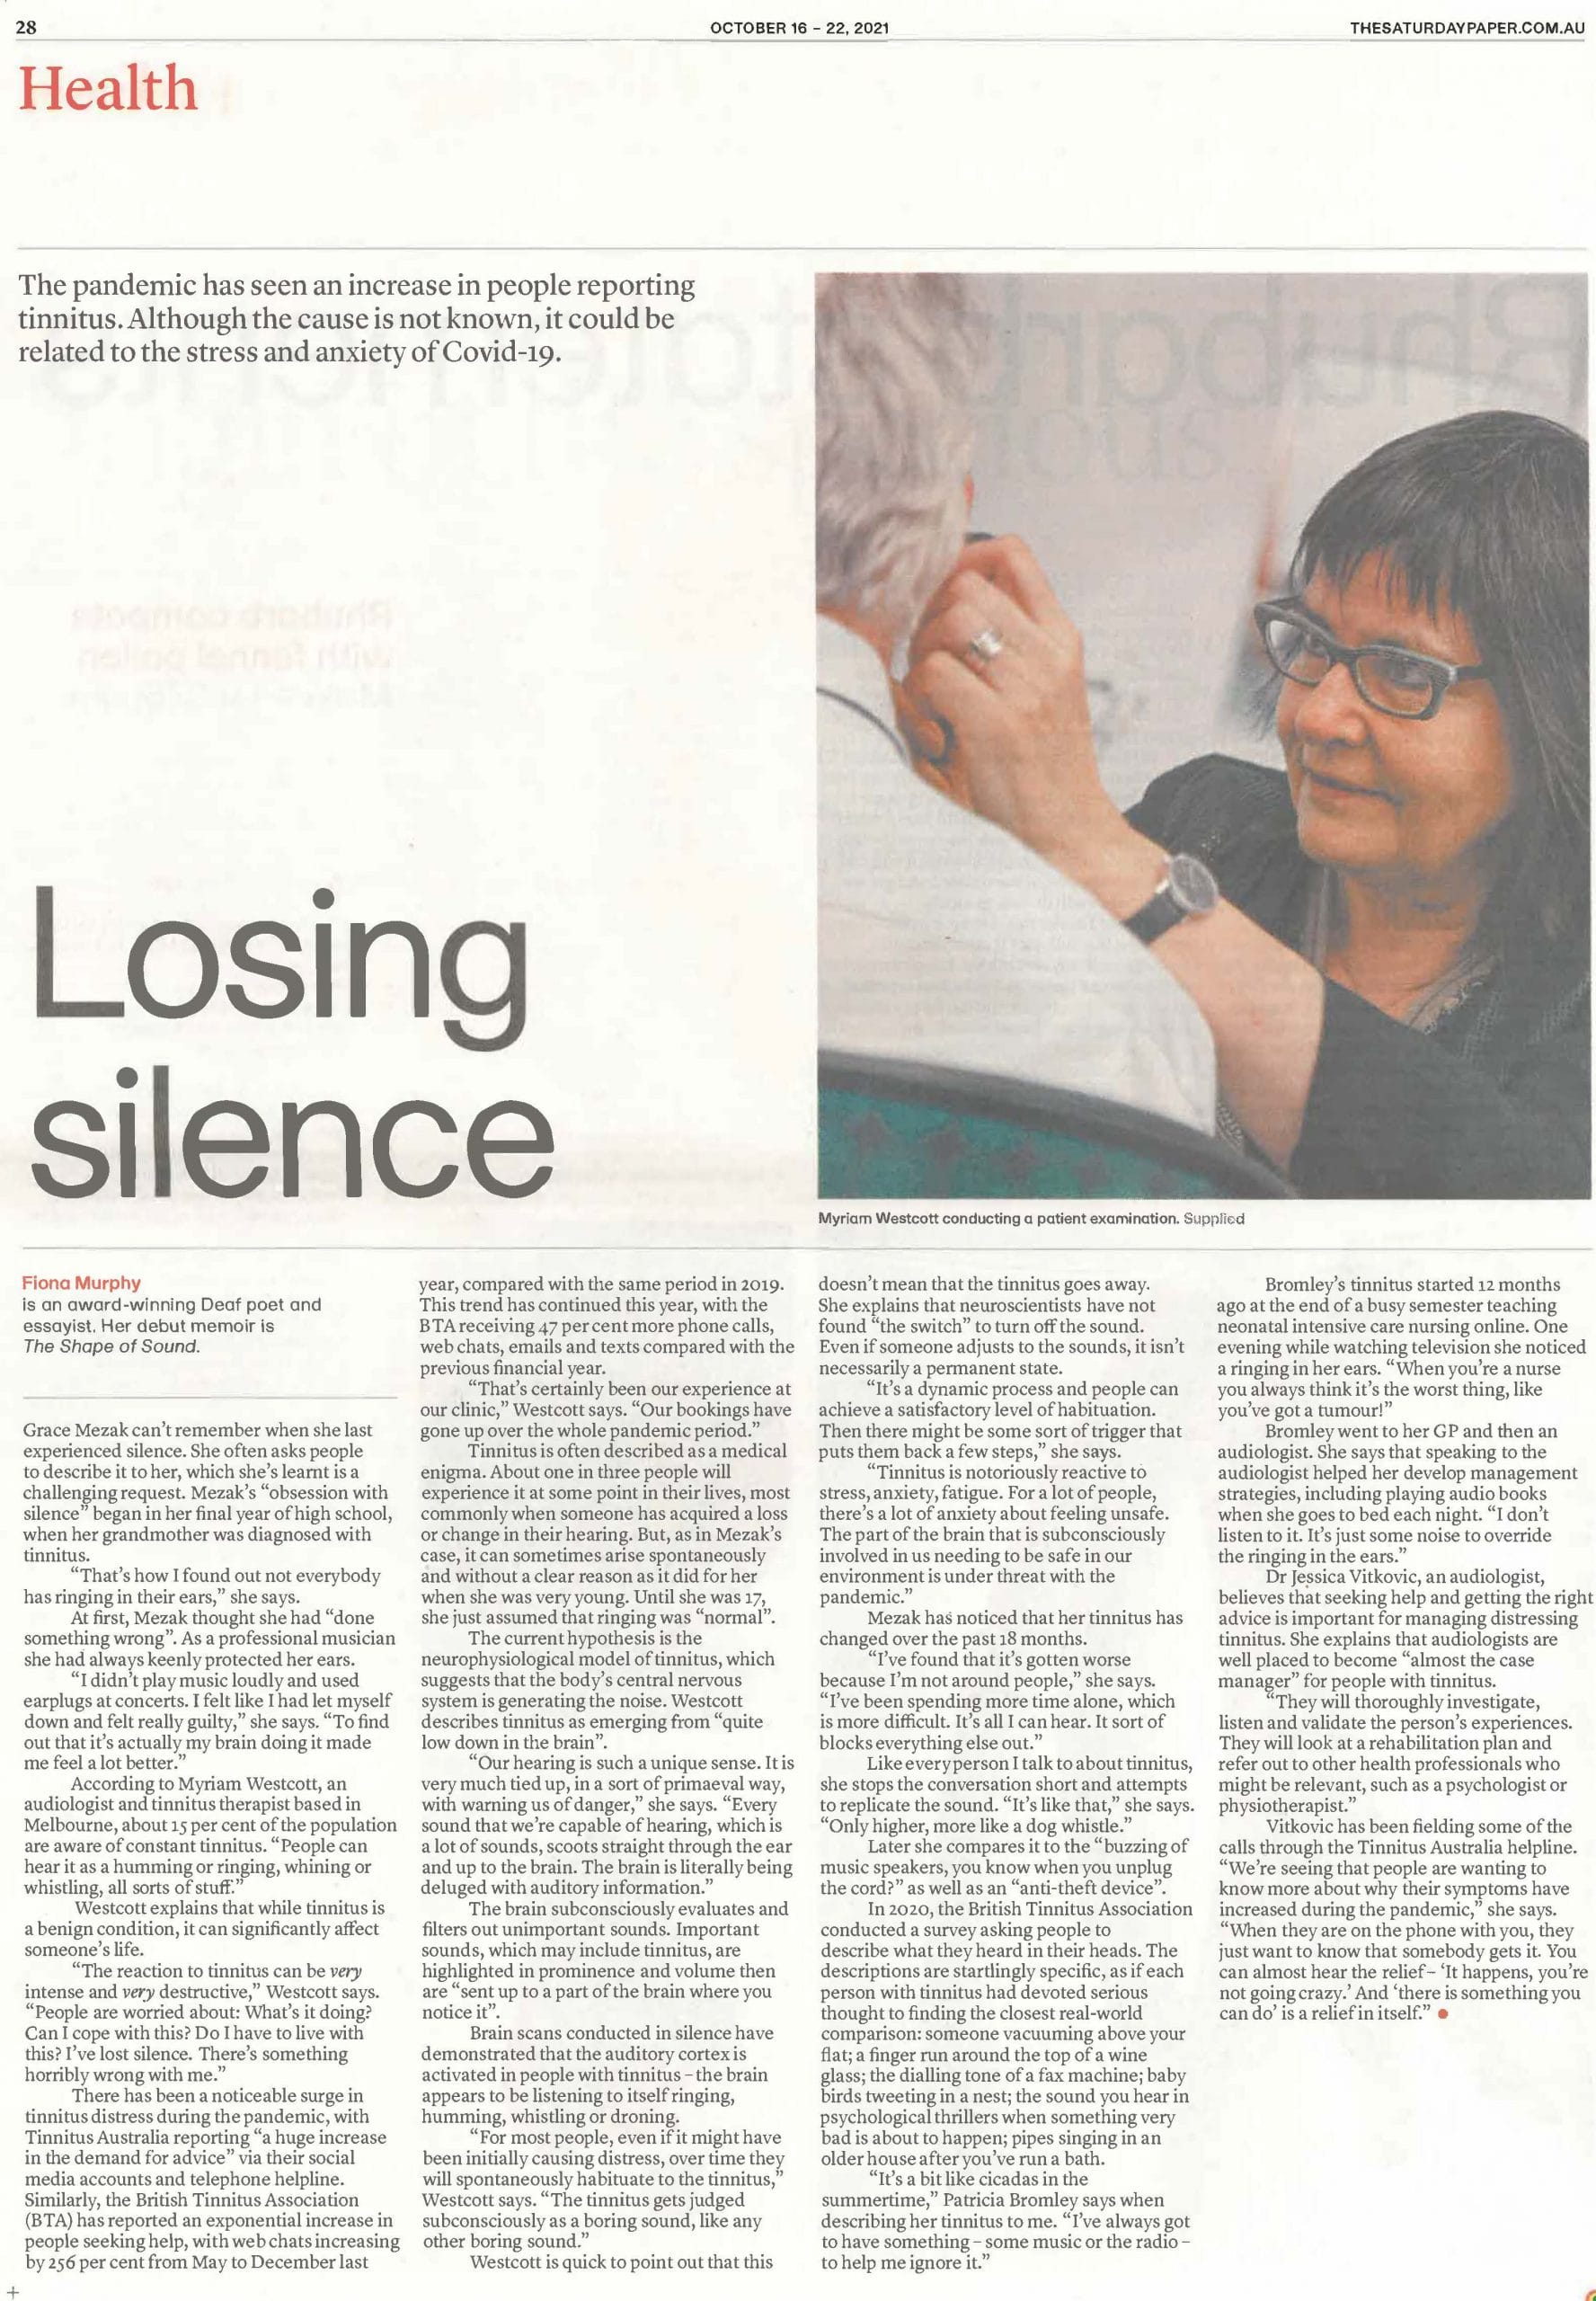 scan of newspaper article on tinnitus in the pandemic with a photo of Myriam Westcott